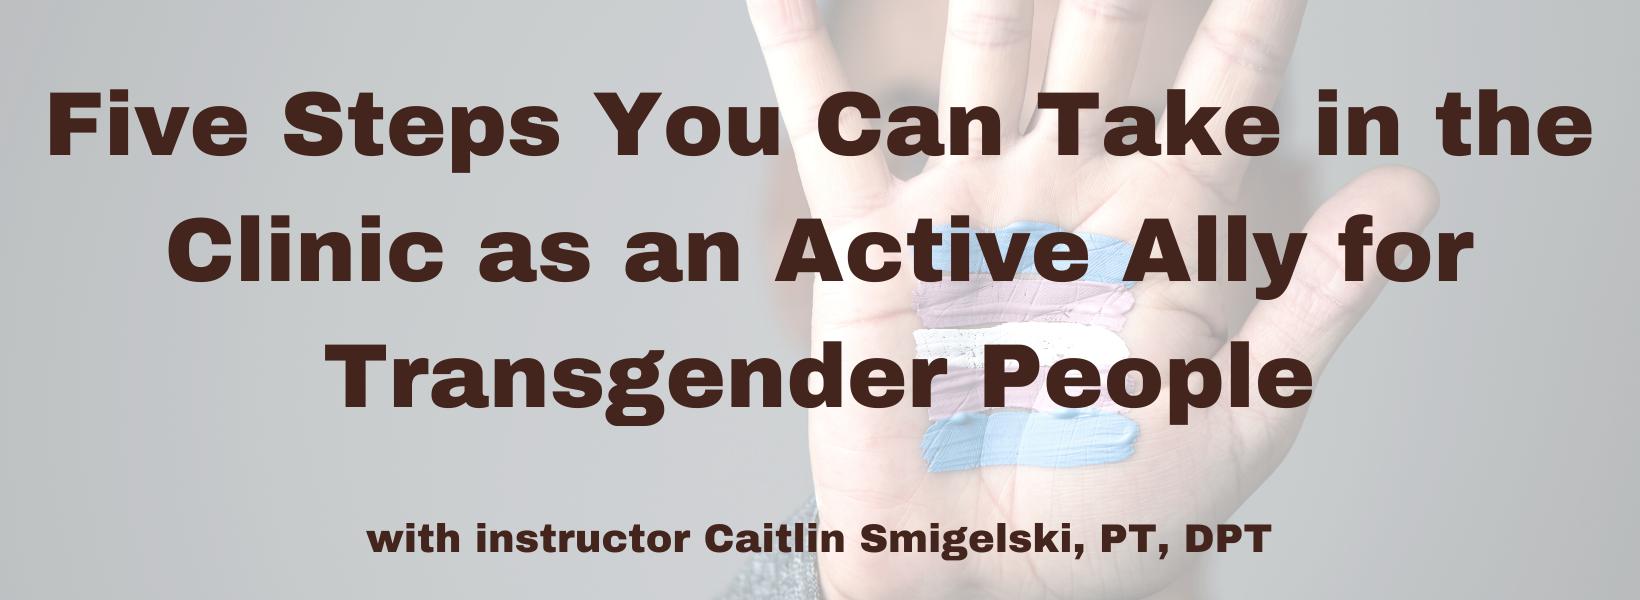 Five Steps You Can Take in the Clinic as an Active Ally for Transgender People